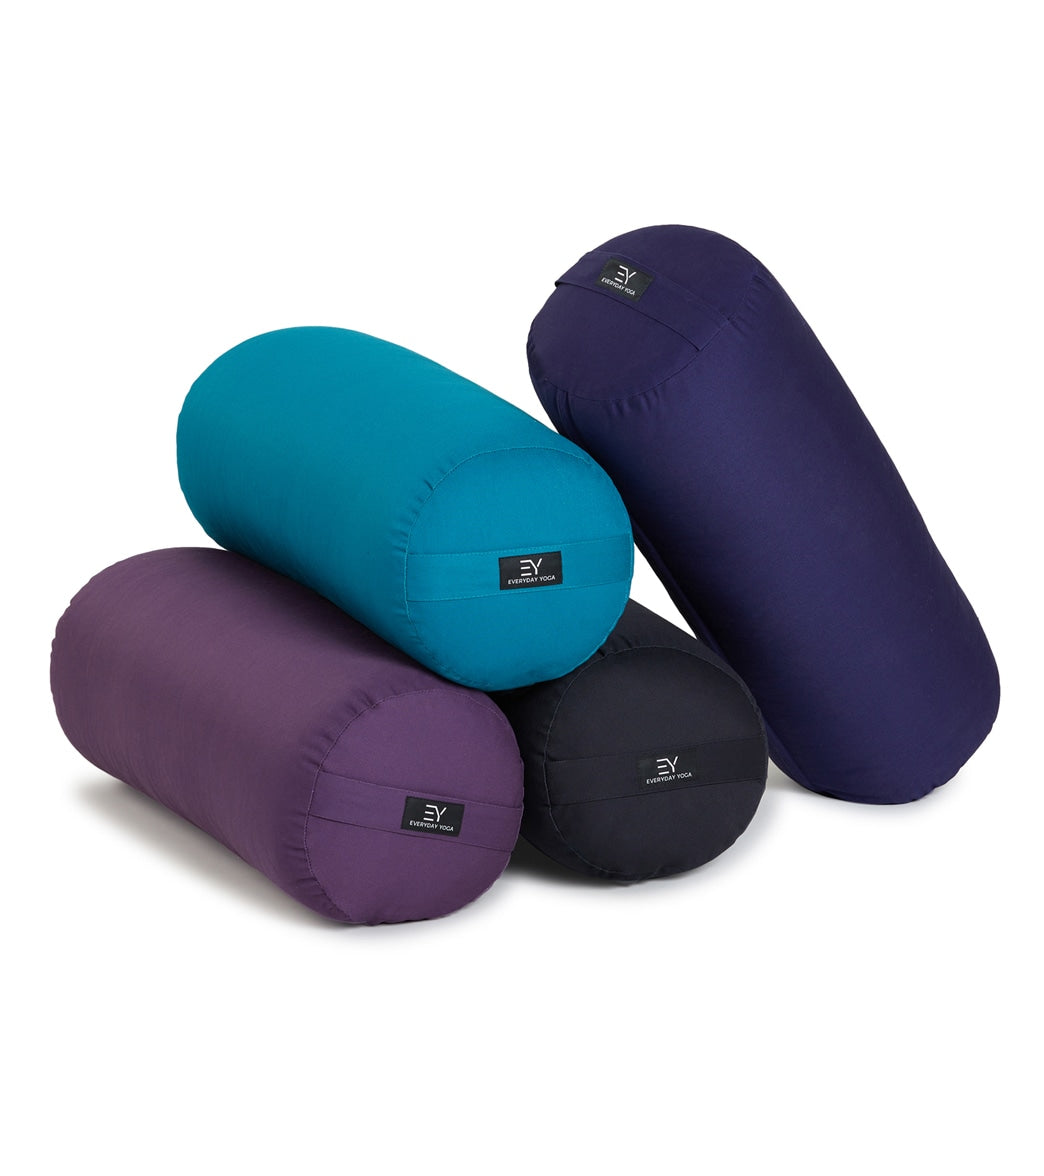 Everyday Yoga High Impact Round Yoga Bolster at YogaOutlet.com –